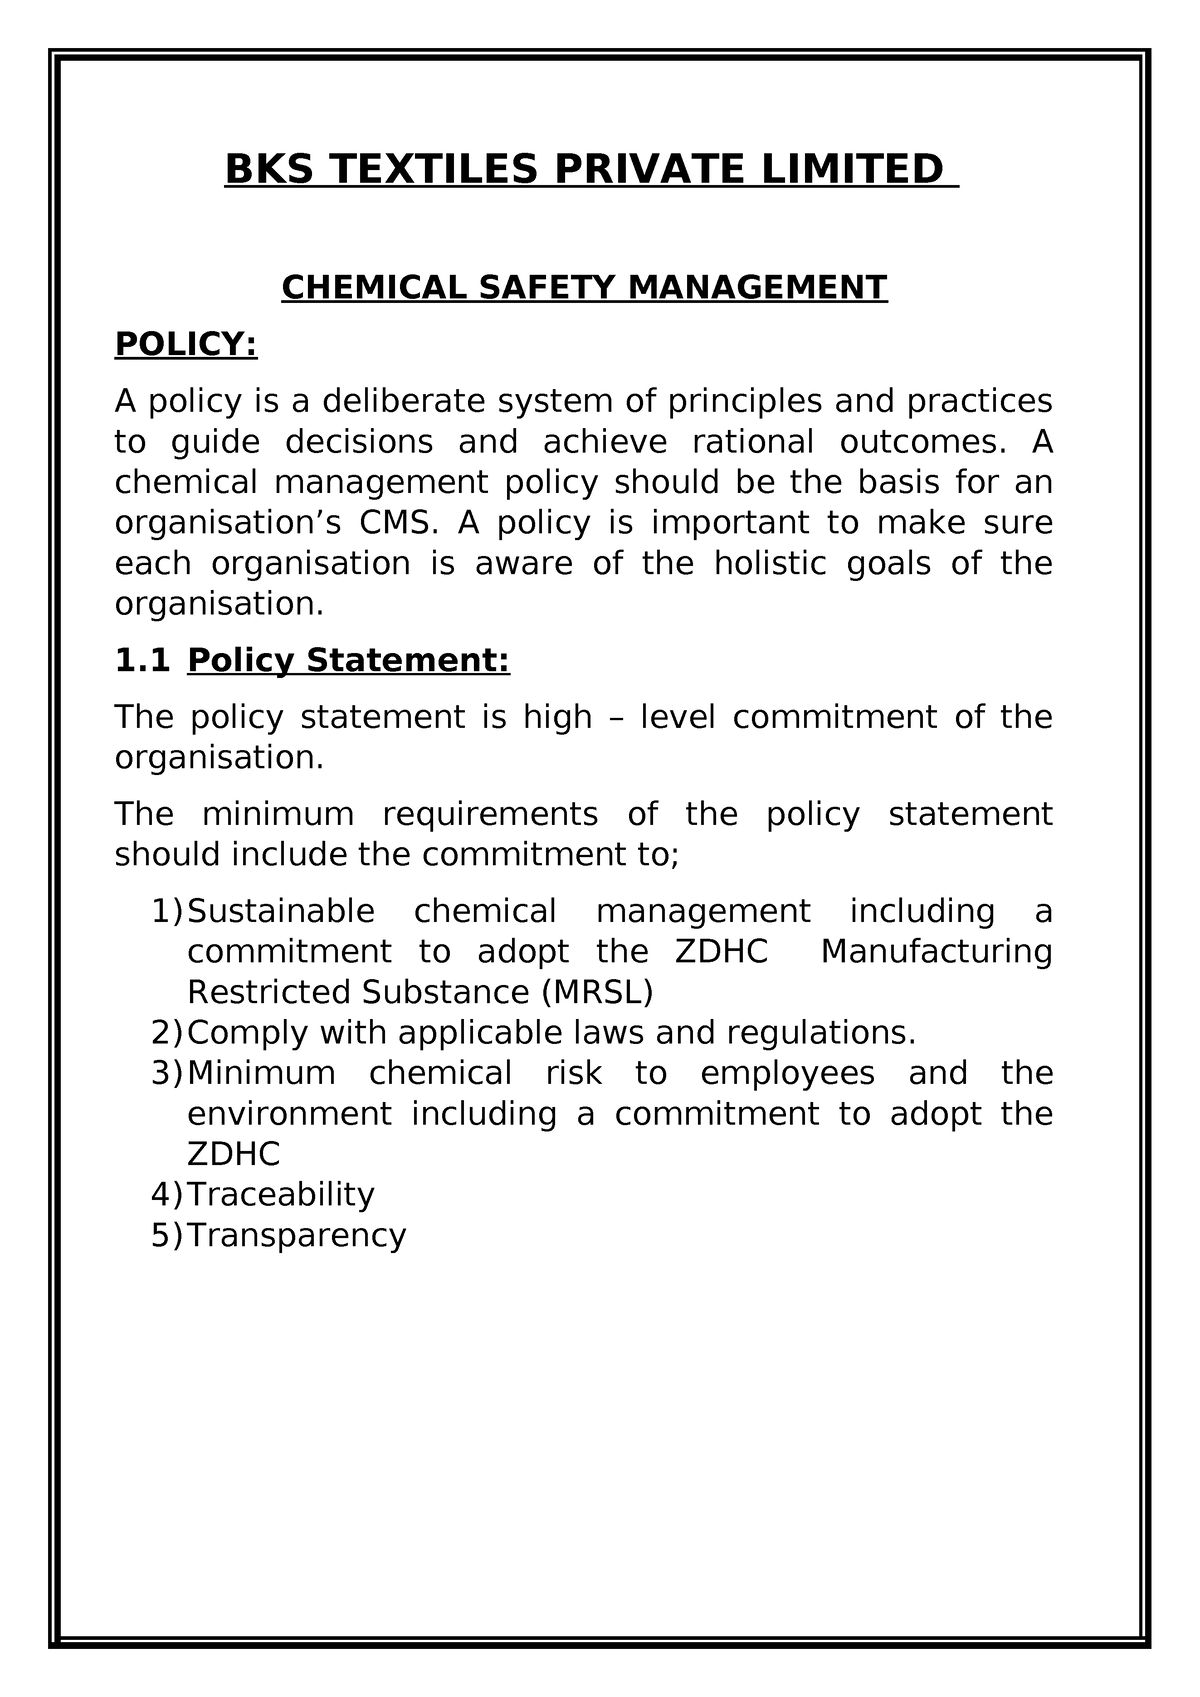 Chemical Management System - BKS TEXTILES PRIVATE LIMITED CHEMICAL ...